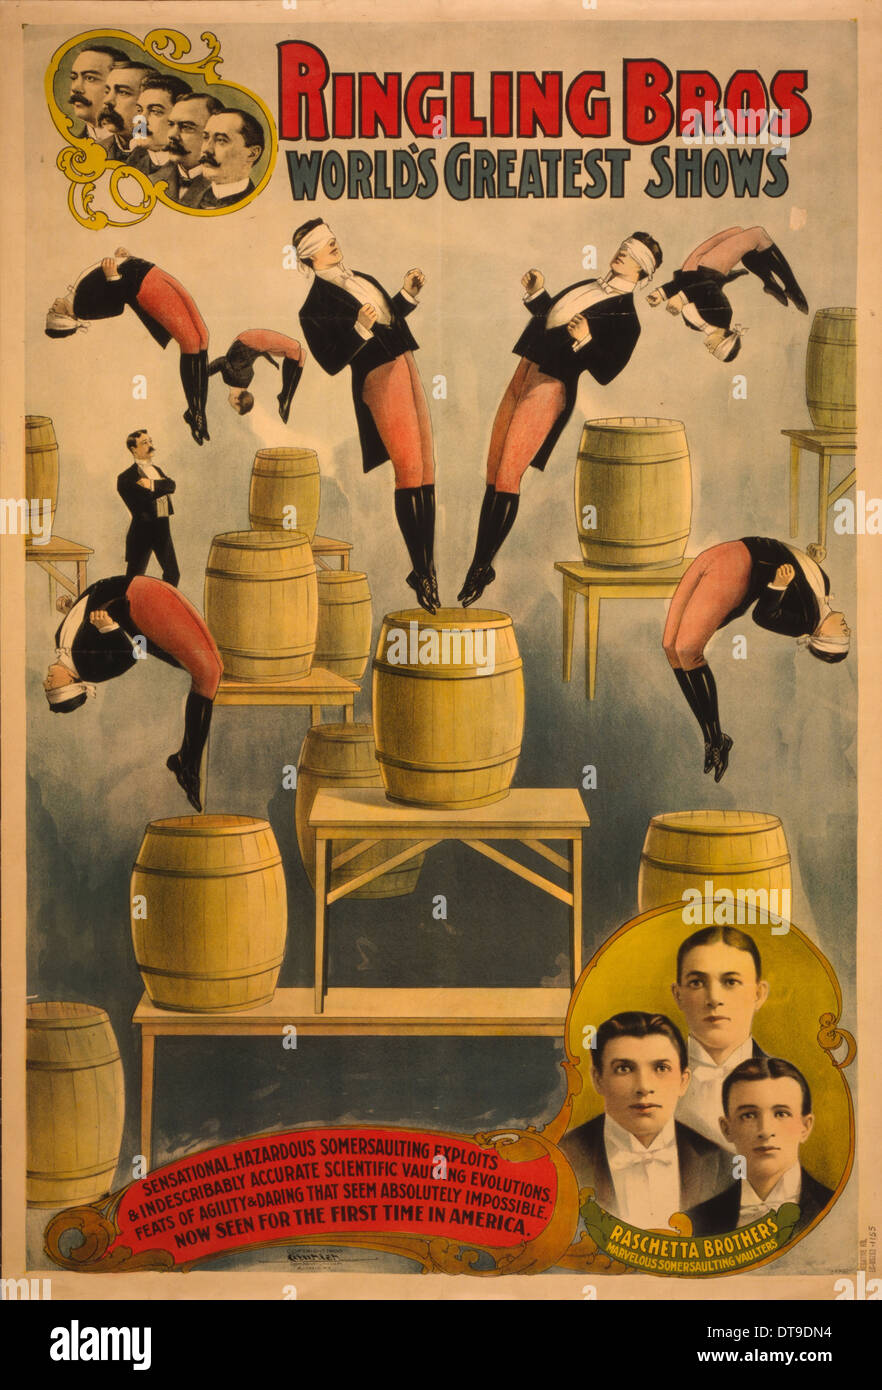 Ringling Bros, world's greatest shows Raschetta brothers, marvelous somersaulting vaulters, c. 1900. Artist: Courier Company Lith. Stock Photo